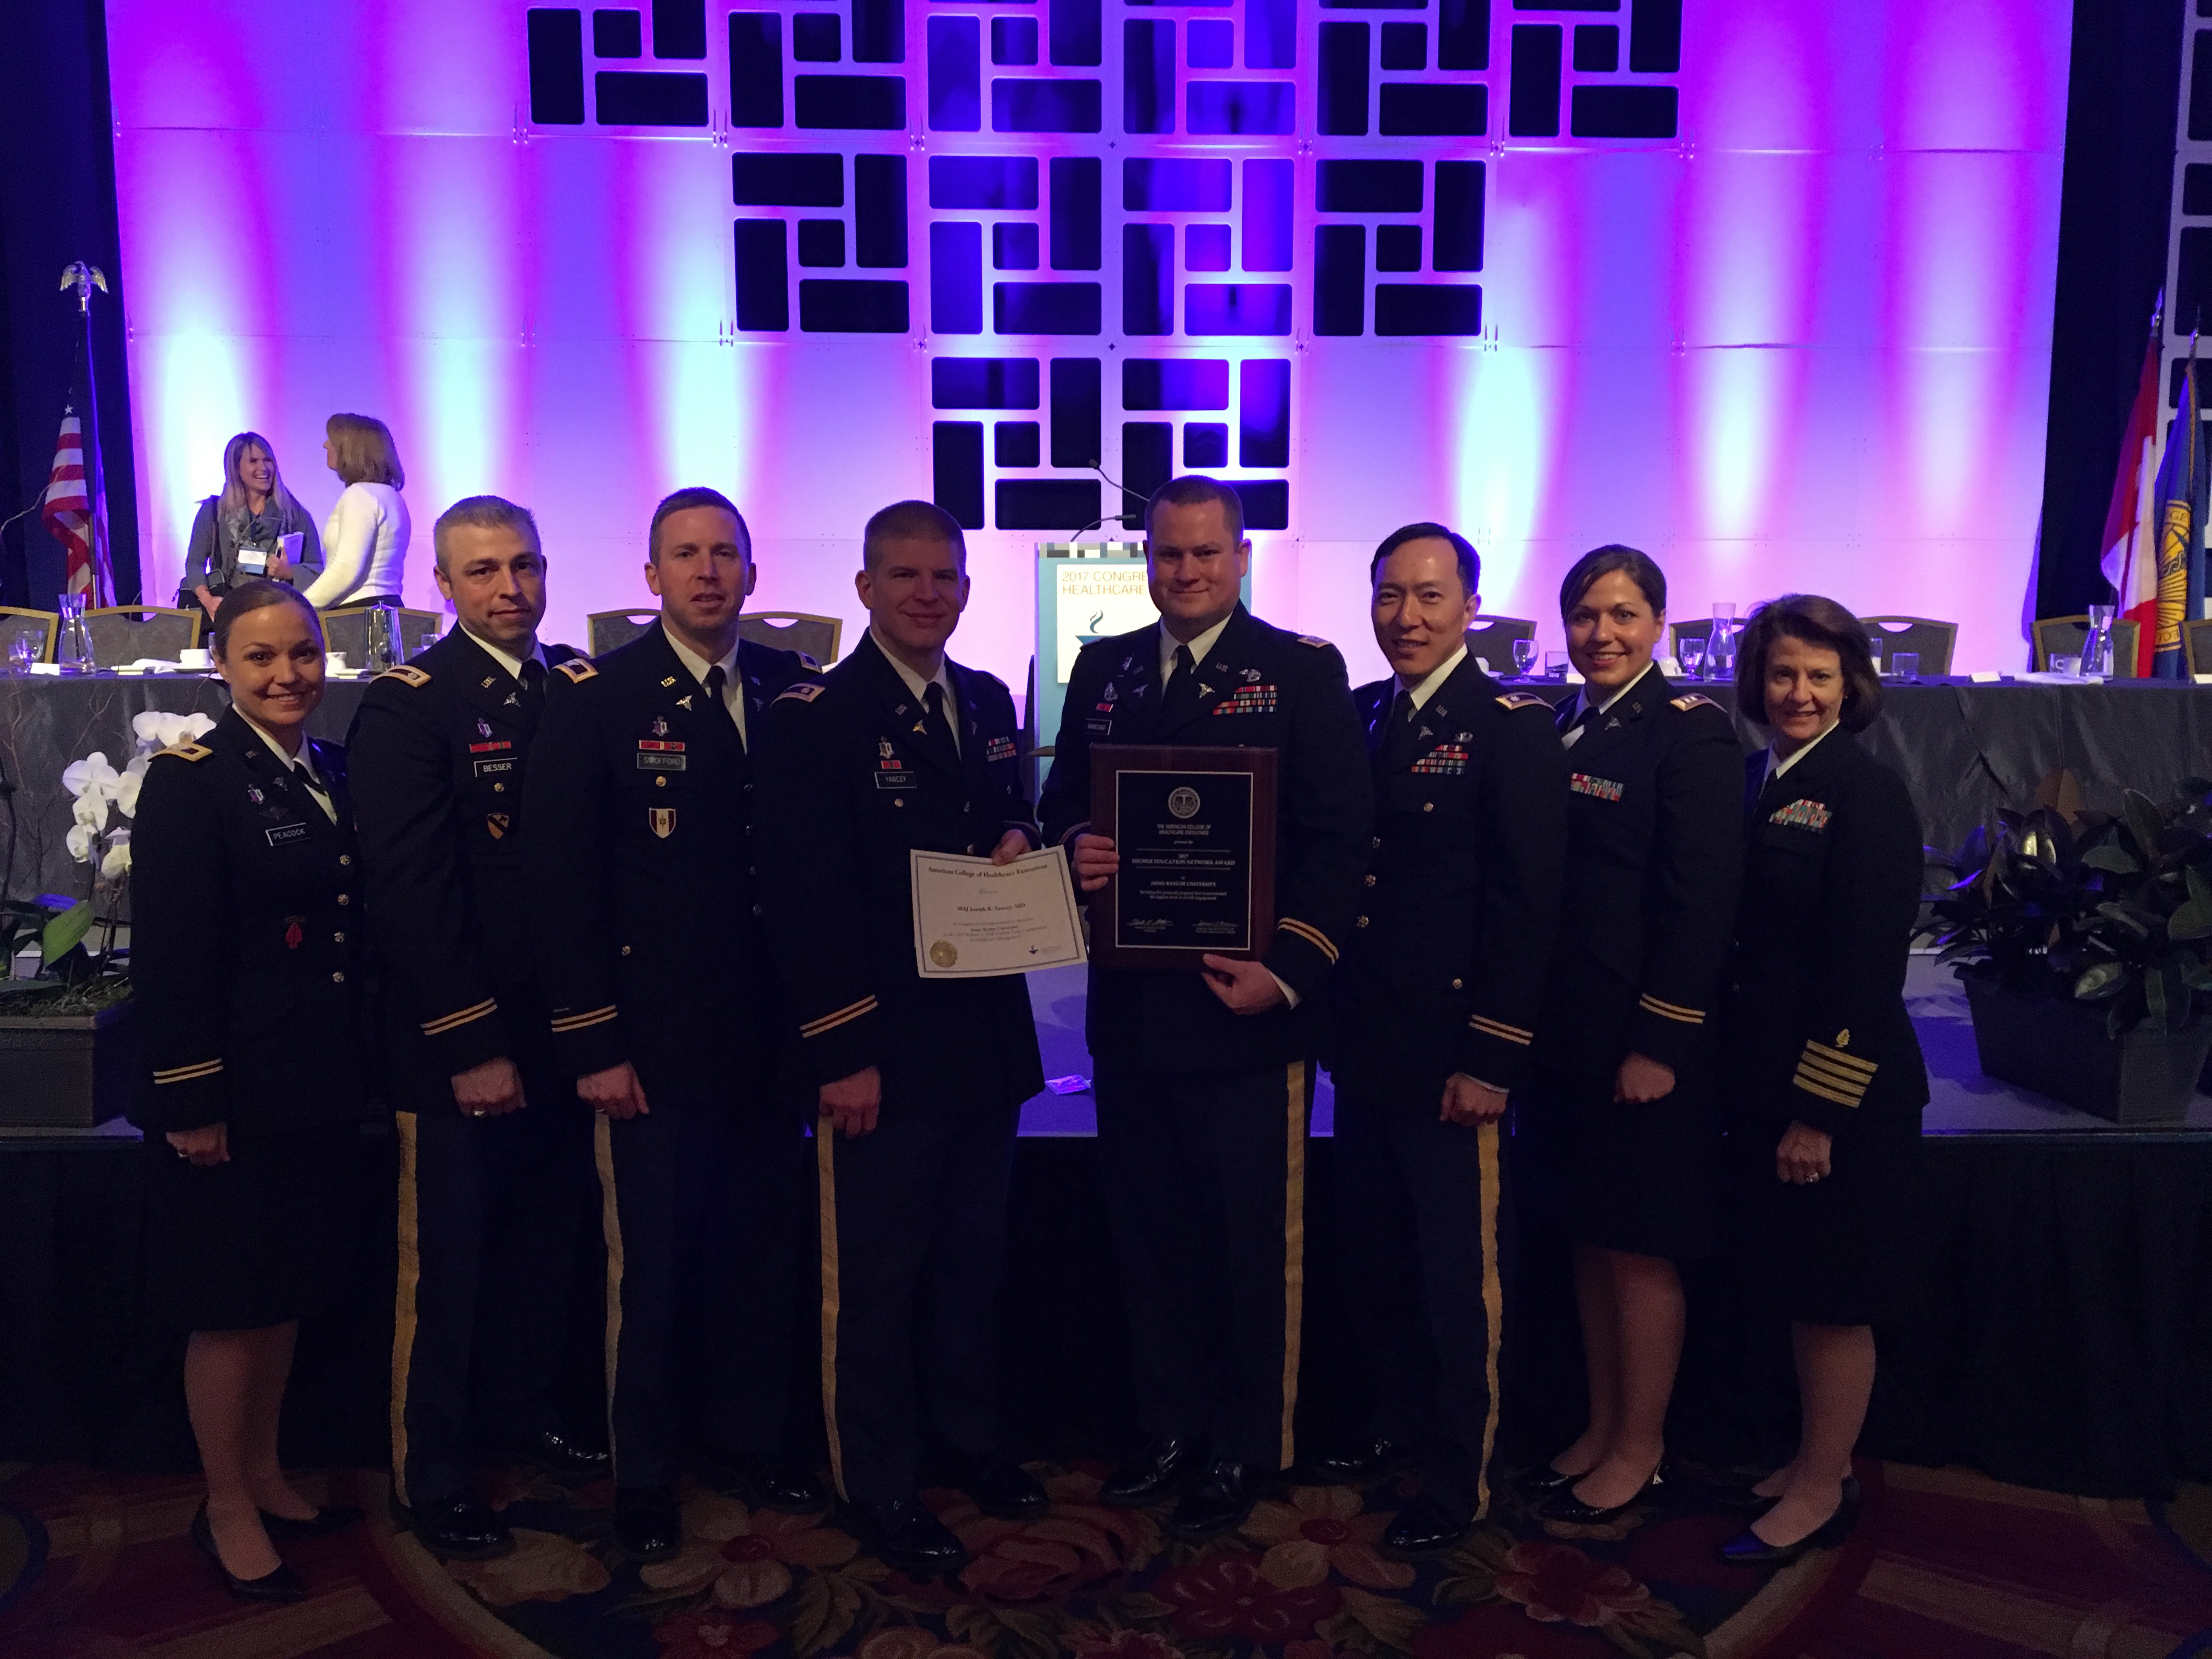 ArmyBaylor Receives National Recognition at ACHE Congress Army